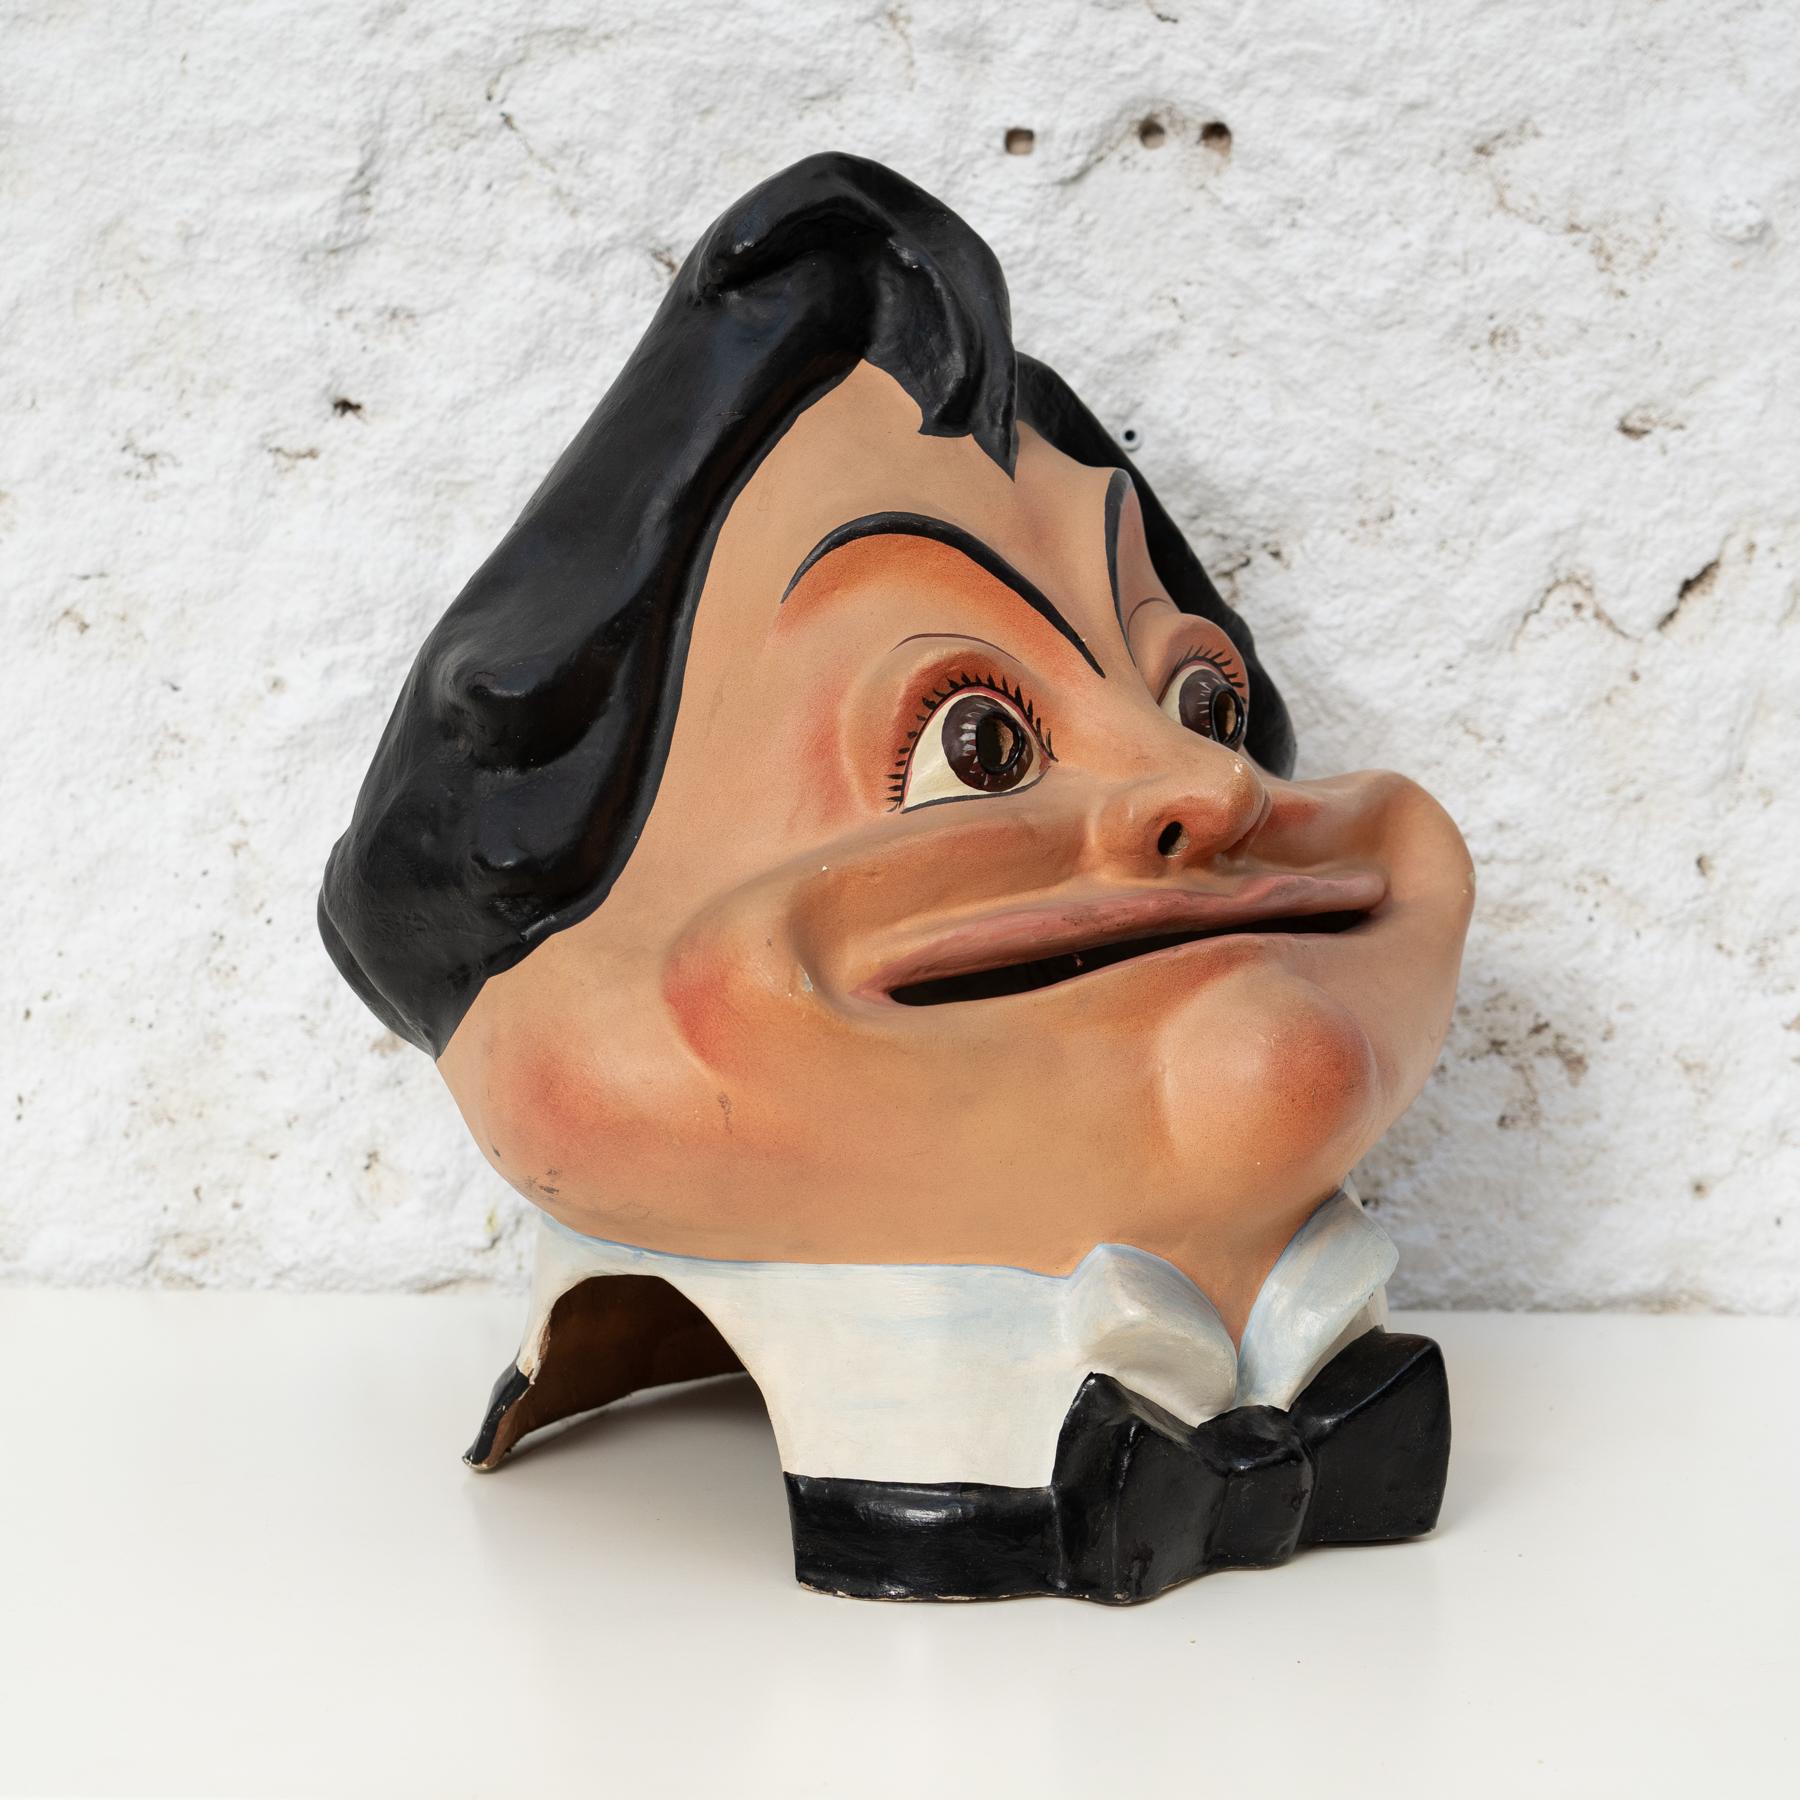     Type: Papier-Mâché Netól Character
    Style: Popular Art, Traditional
    Origin: Handmade in Spain, c. 1970

Original Condition  Whimsical Charm  Handcrafted Tradition

Behold the enchanting 'Cap Gros' Papier-Mâché Netól Character, a whimsical